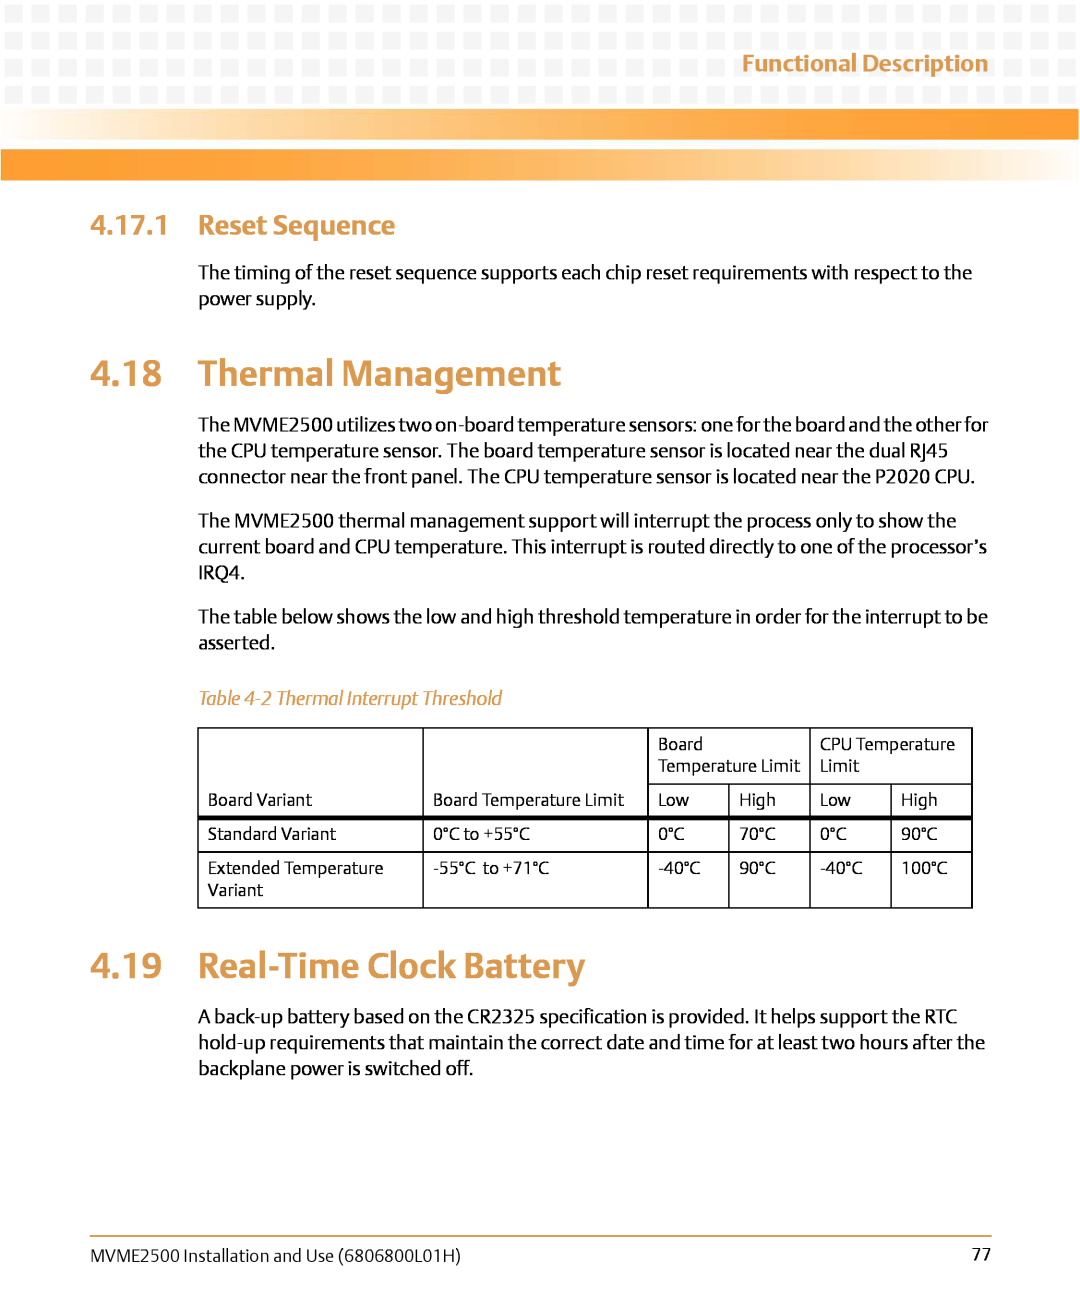 Emerson MVME2500 manual Thermal Management, Real-Time Clock Battery, Reset Sequence, 2 Thermal Interrupt Threshold 